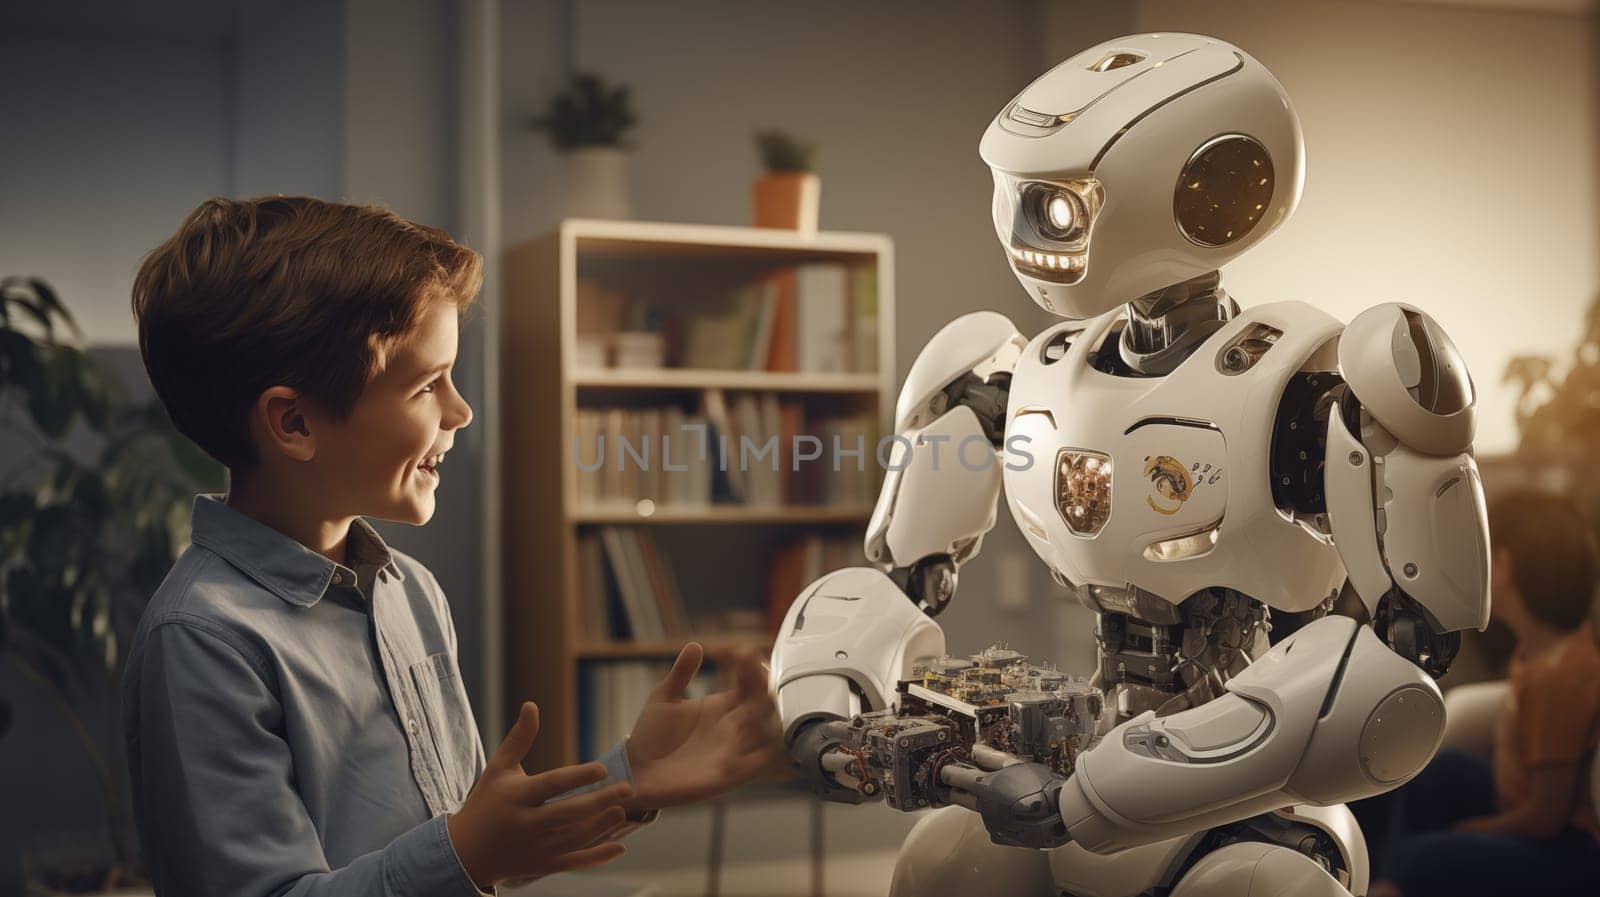 A young boy with a joyous expression communicates with a white educational robot by Zakharova